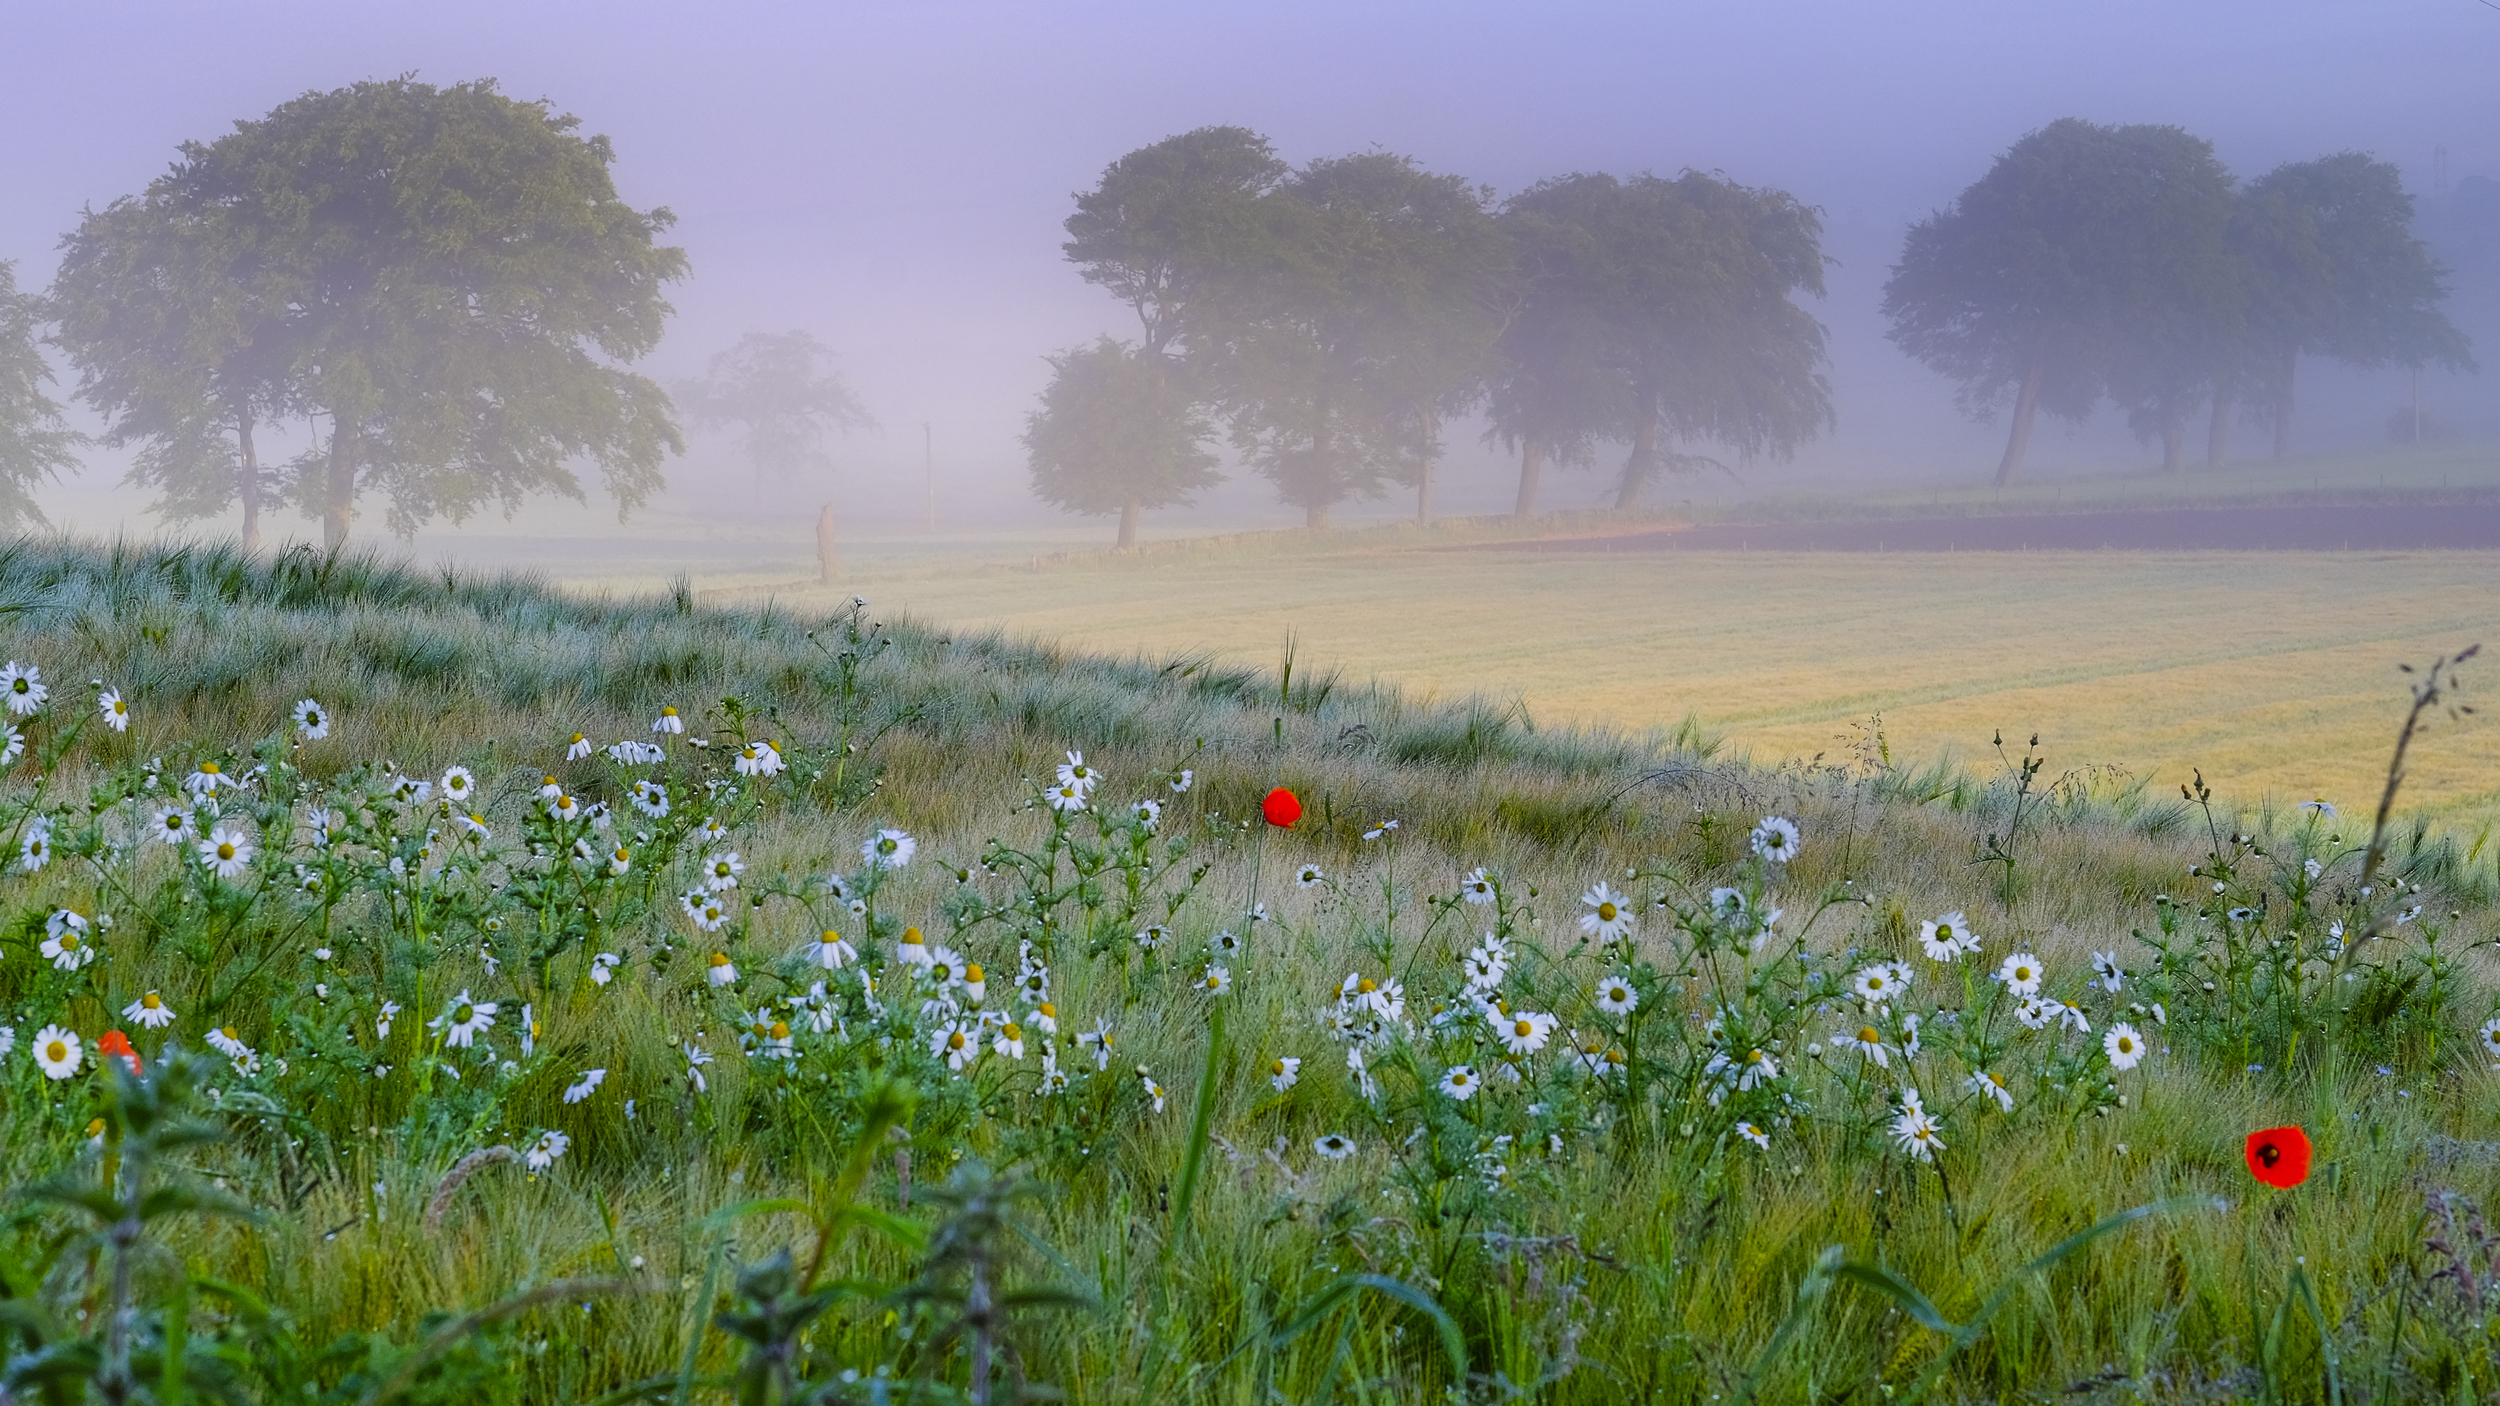    Scottish Landscape Photographer of the Year 2015     Highly Commended' award in the 2015 Scottish Landscape Photographer of the Year competition. Out of the three images that had made the final, the image above of 'Wildflowers, Torrance' achieved 